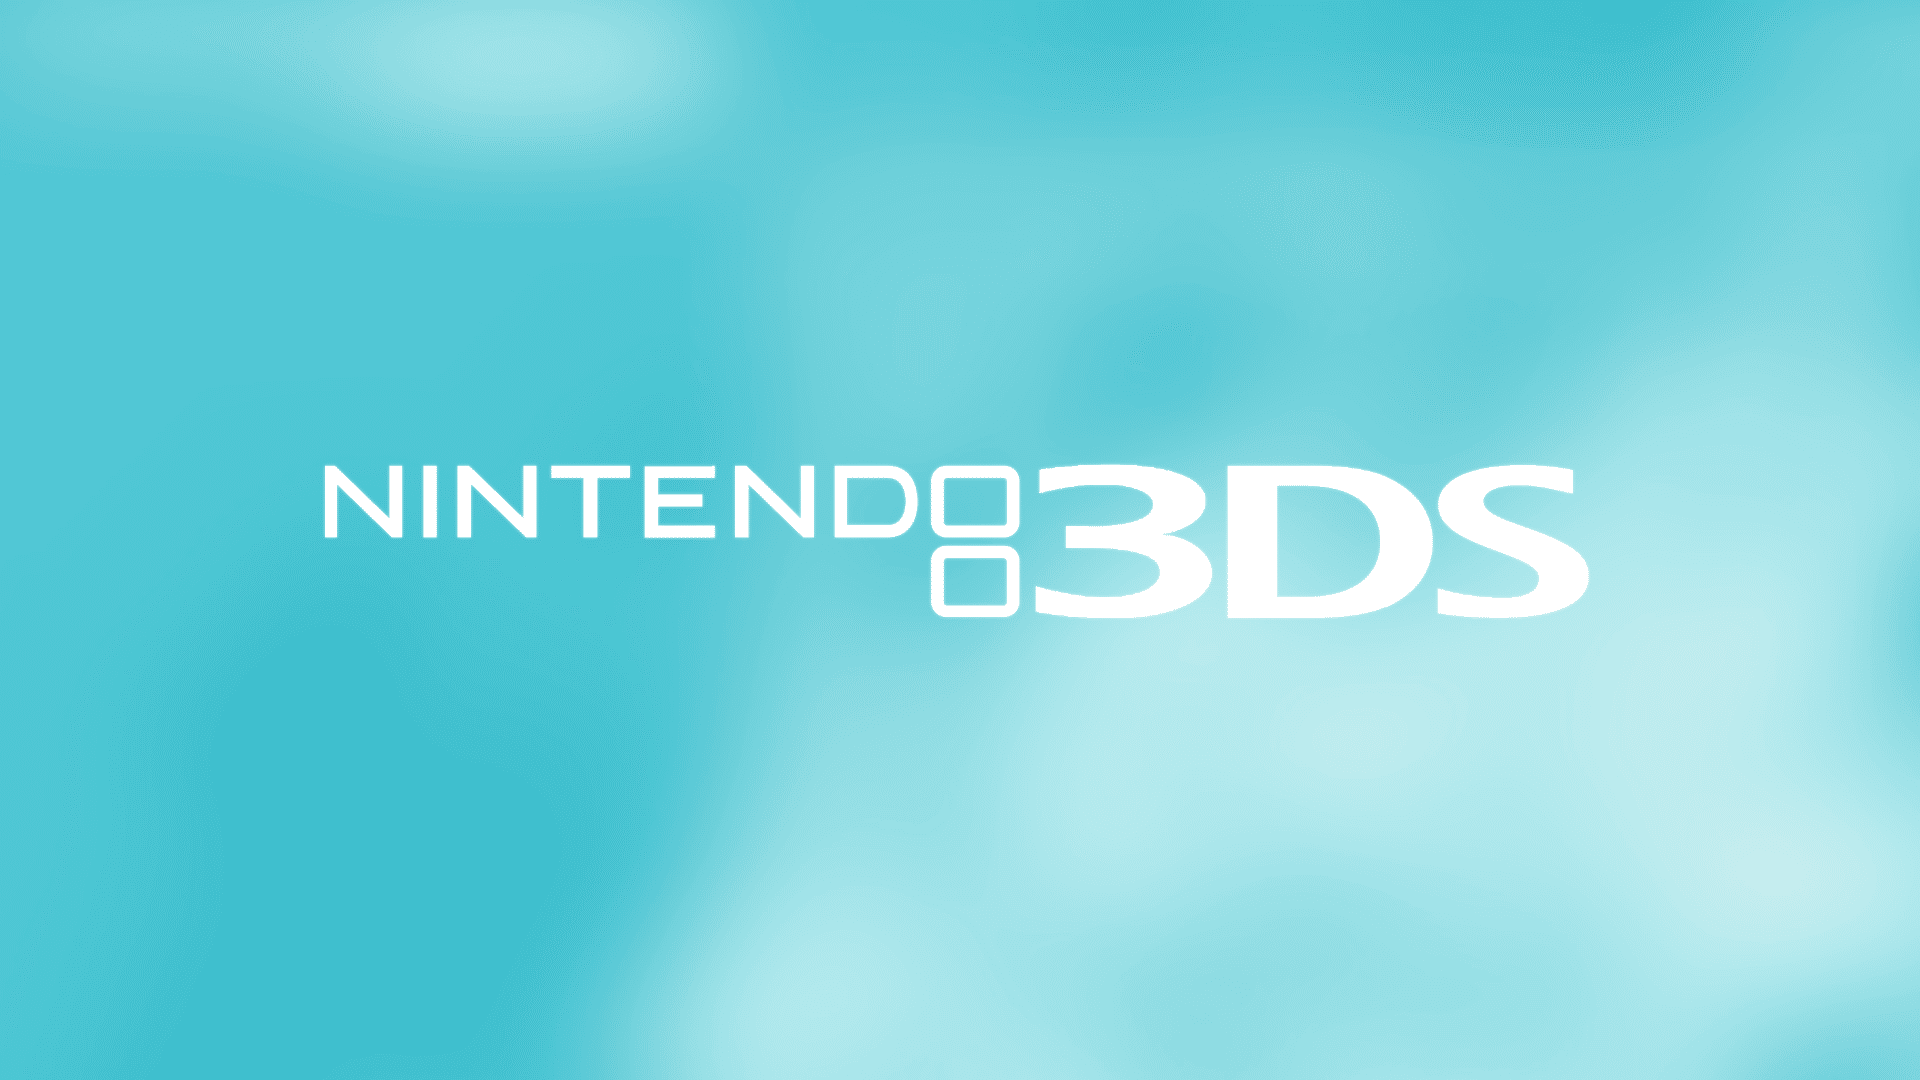 3DS after 2019 still supported